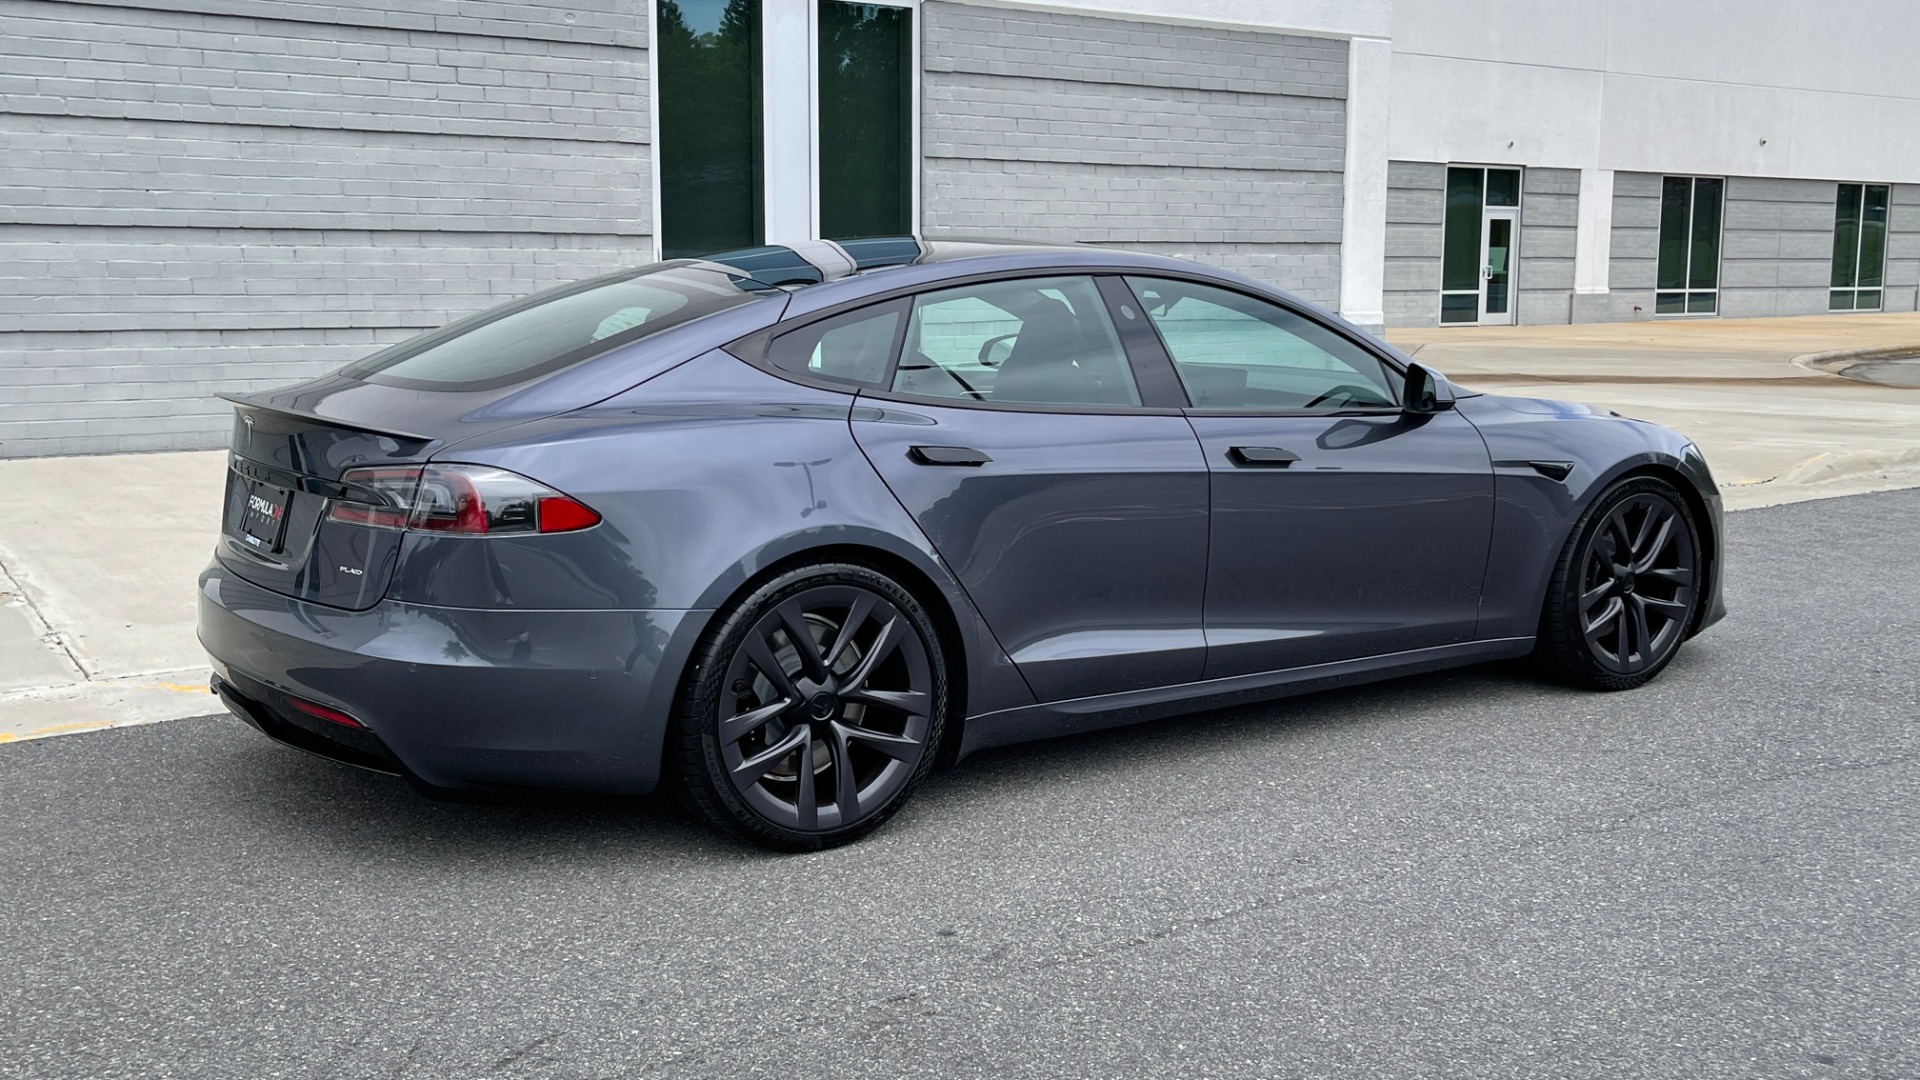 Used 2021 Tesla Model S Plaid / FULL SELF DRIVING / 21IN WHEELS / CARBON FIBER TRIM / PREMIUM CONNE for sale $134,000 at Formula Imports in Charlotte NC 28227 6